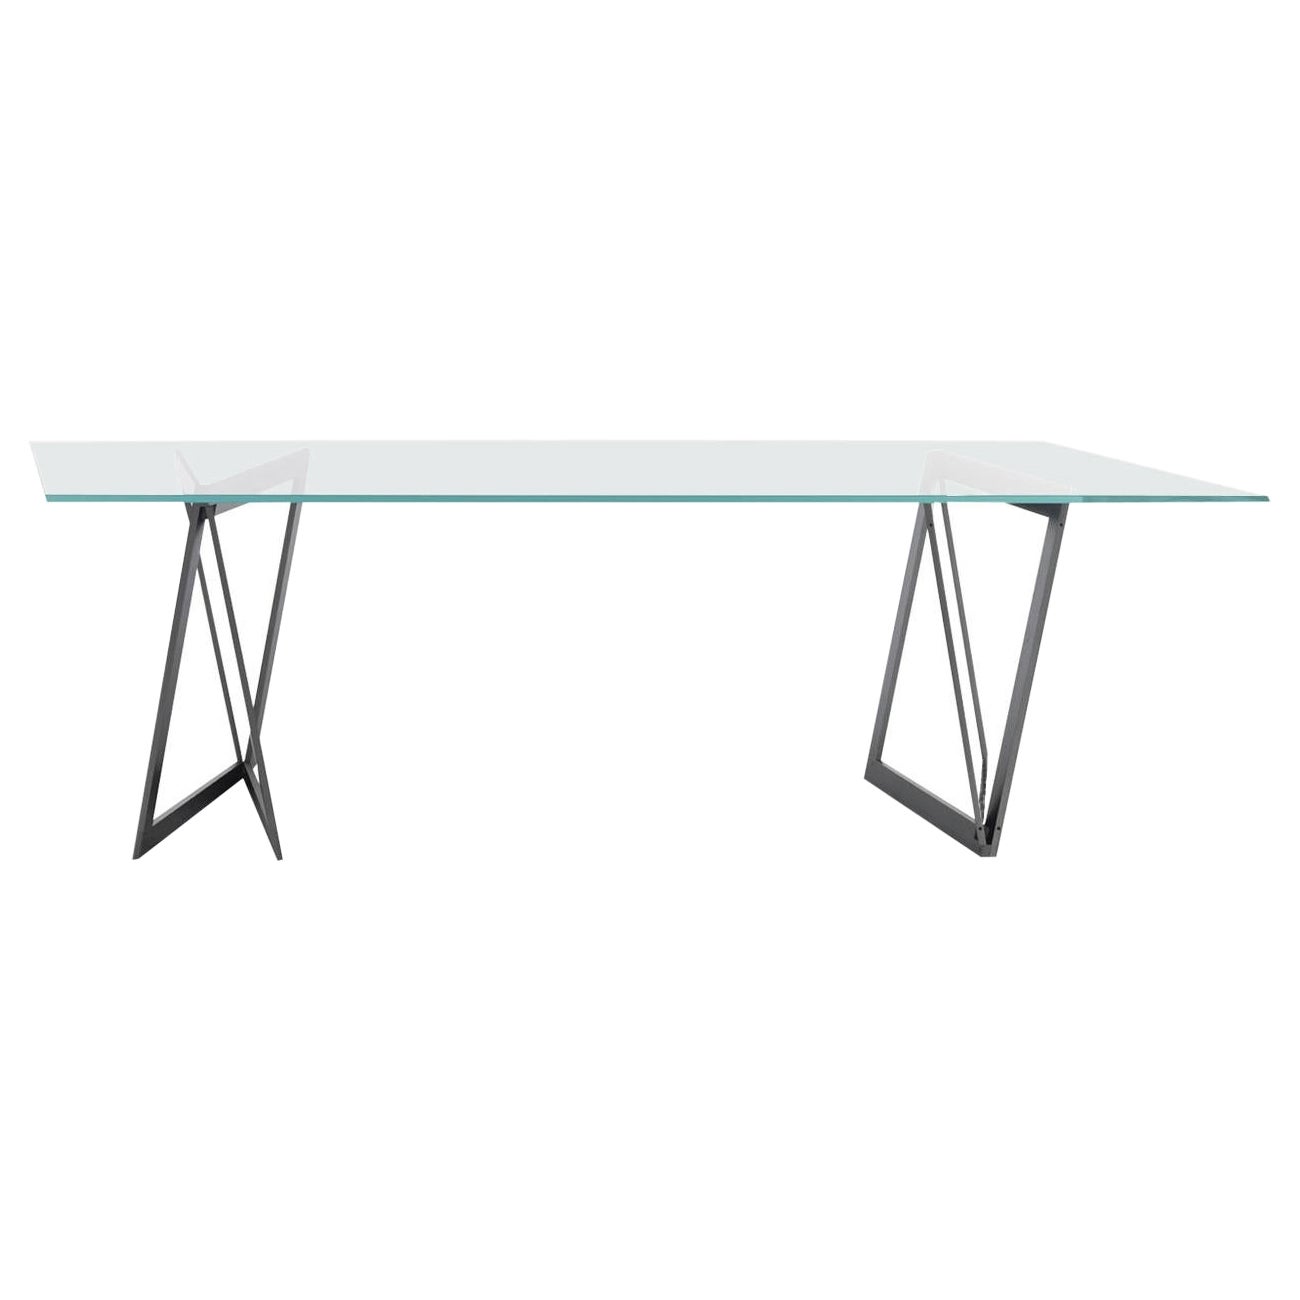 QuaDror 02 Dining Table by Dror